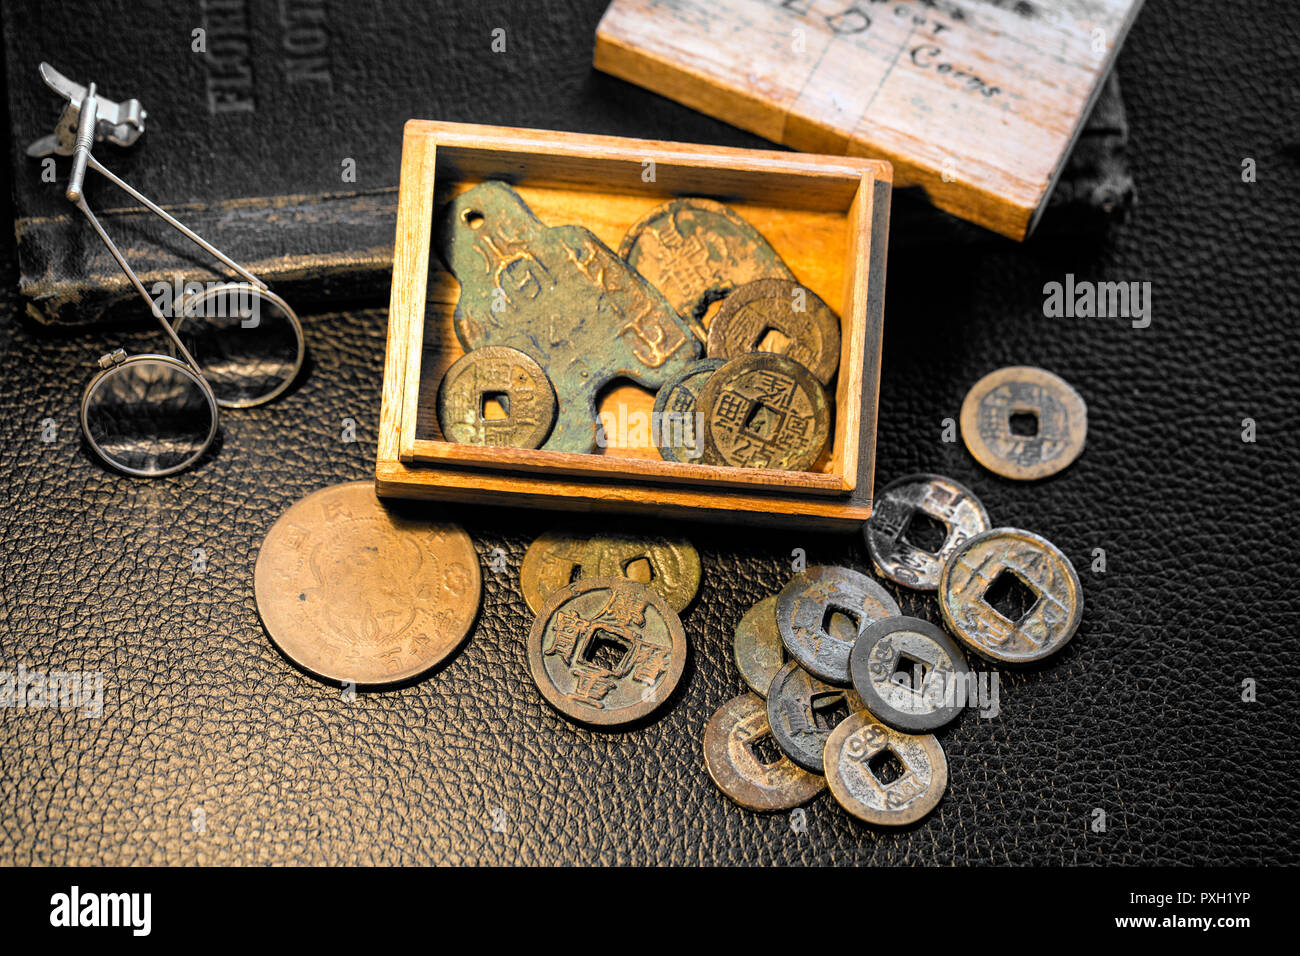 Young boy's balsa wood box 'Keep out' 'Old Coins' full of ancient China and Japan bronze, metal cash coinage-with patina of age. Stock Photo